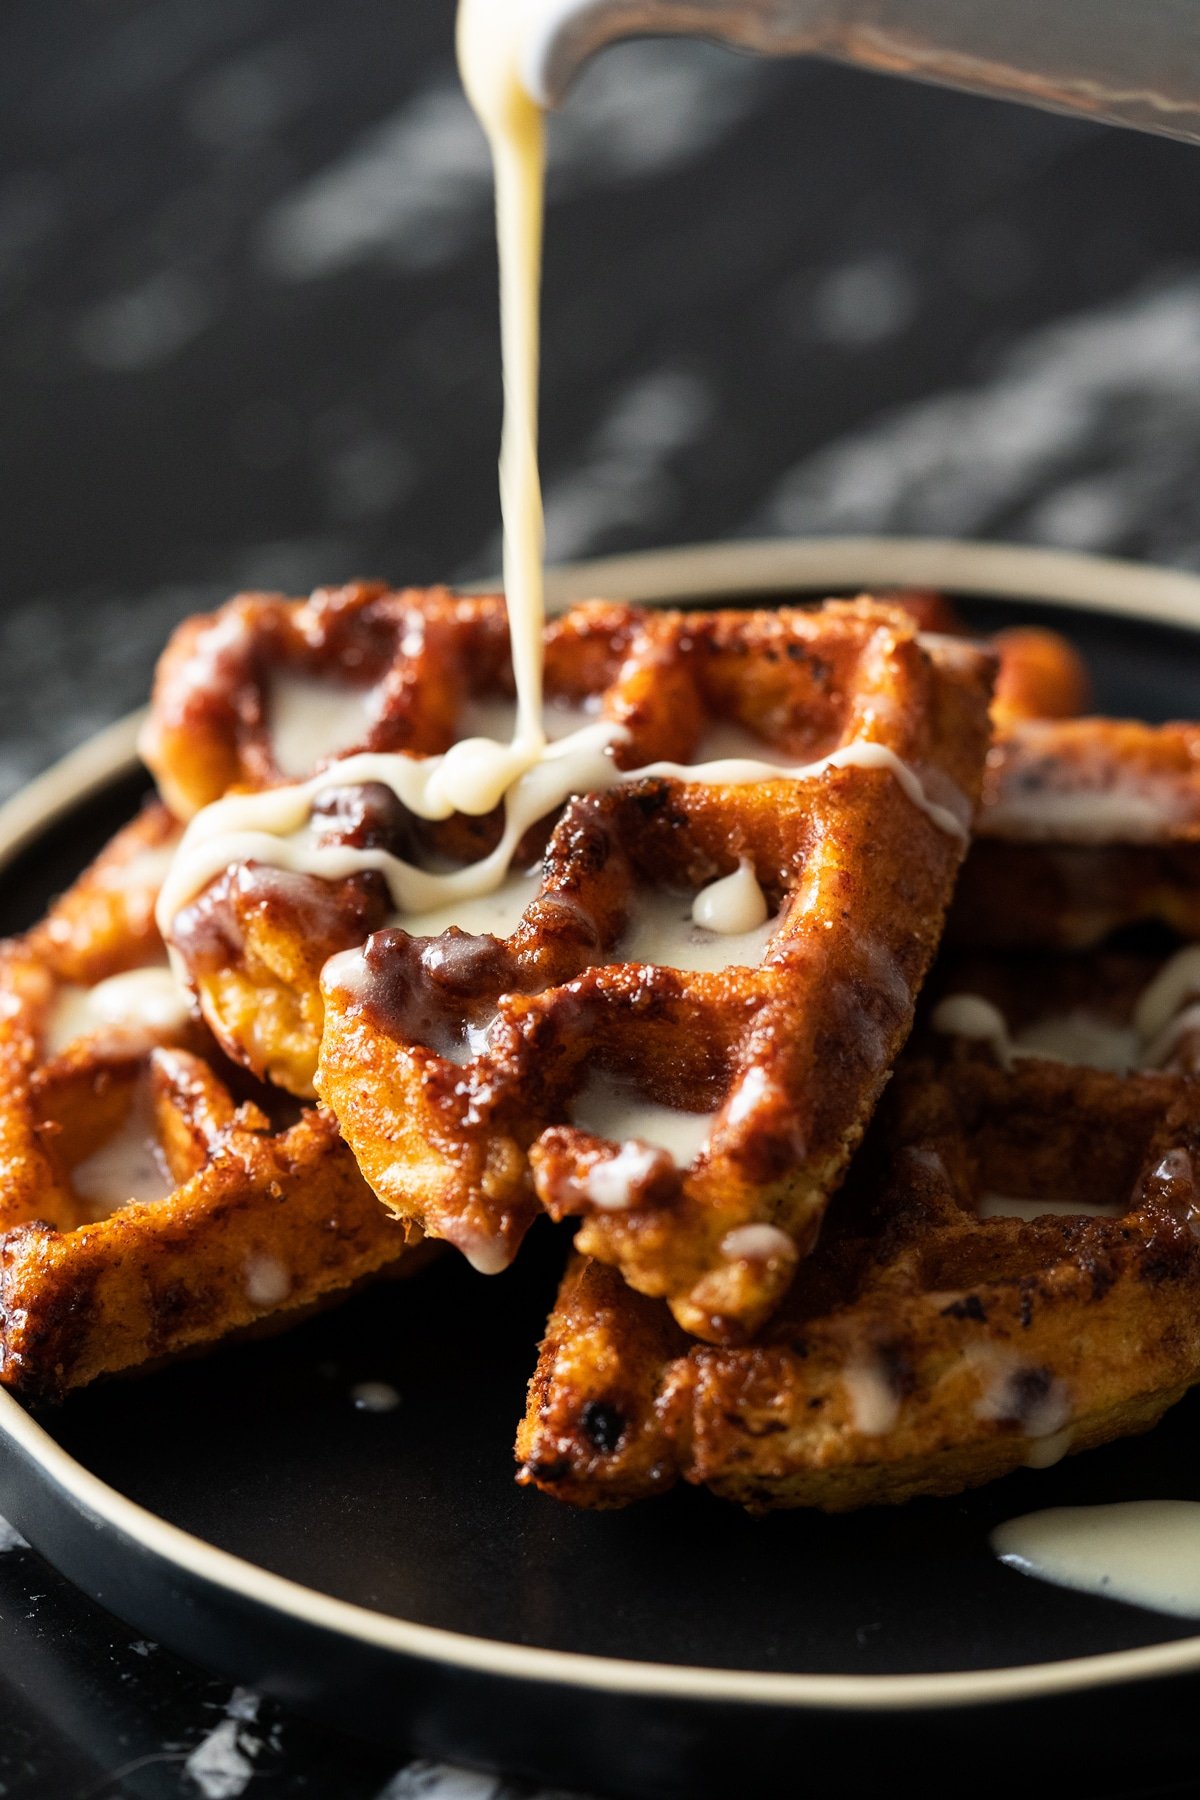 Gluten free & keto cinnamon roll waffles with yeast and a drizzle of cream cheese glaze